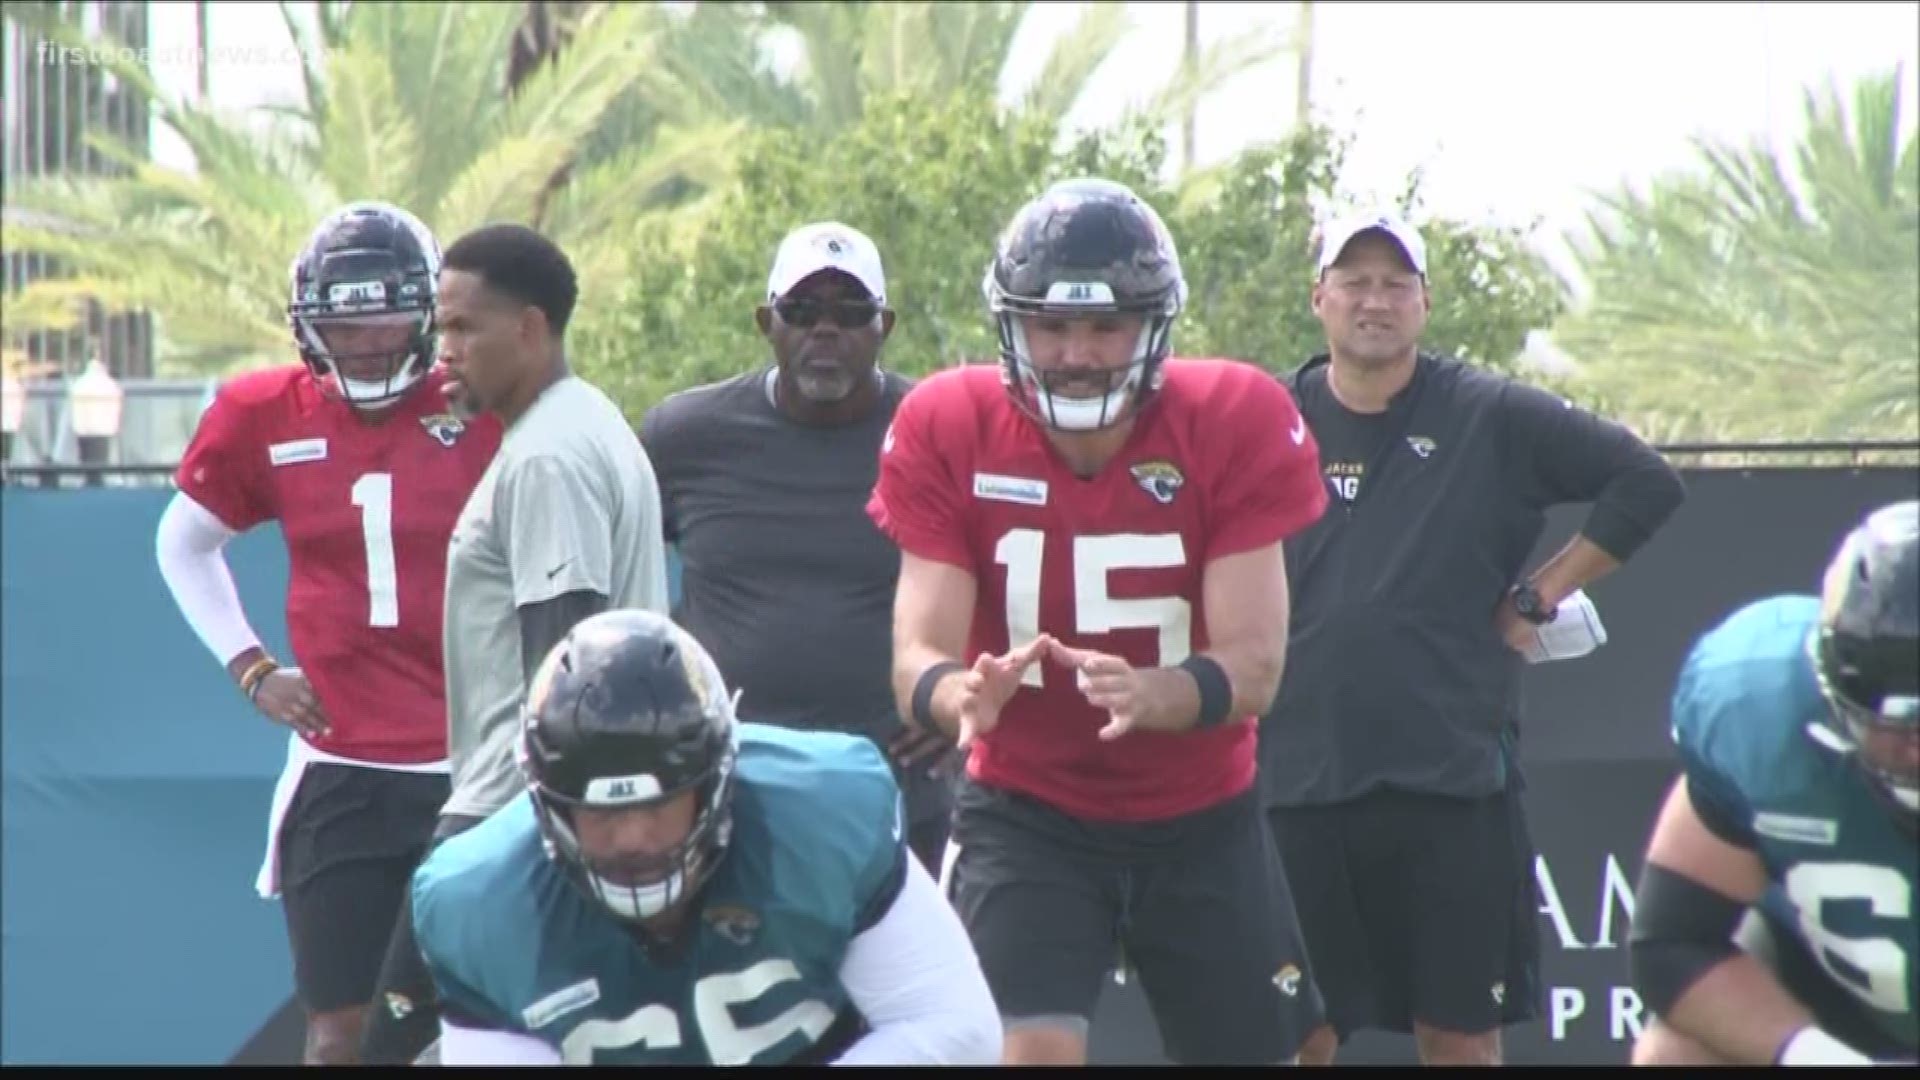 Jaguars quarterback Gardner Minshew has had a longer road to get to the NFL than most quarterbacks his age. But that has made him all the more prepared for his first start as a quarterback in the NFL. If his performance in week two is anything like it was in week one in relief for Nick Foles, the Jaguars are in for a pleasant surprise.